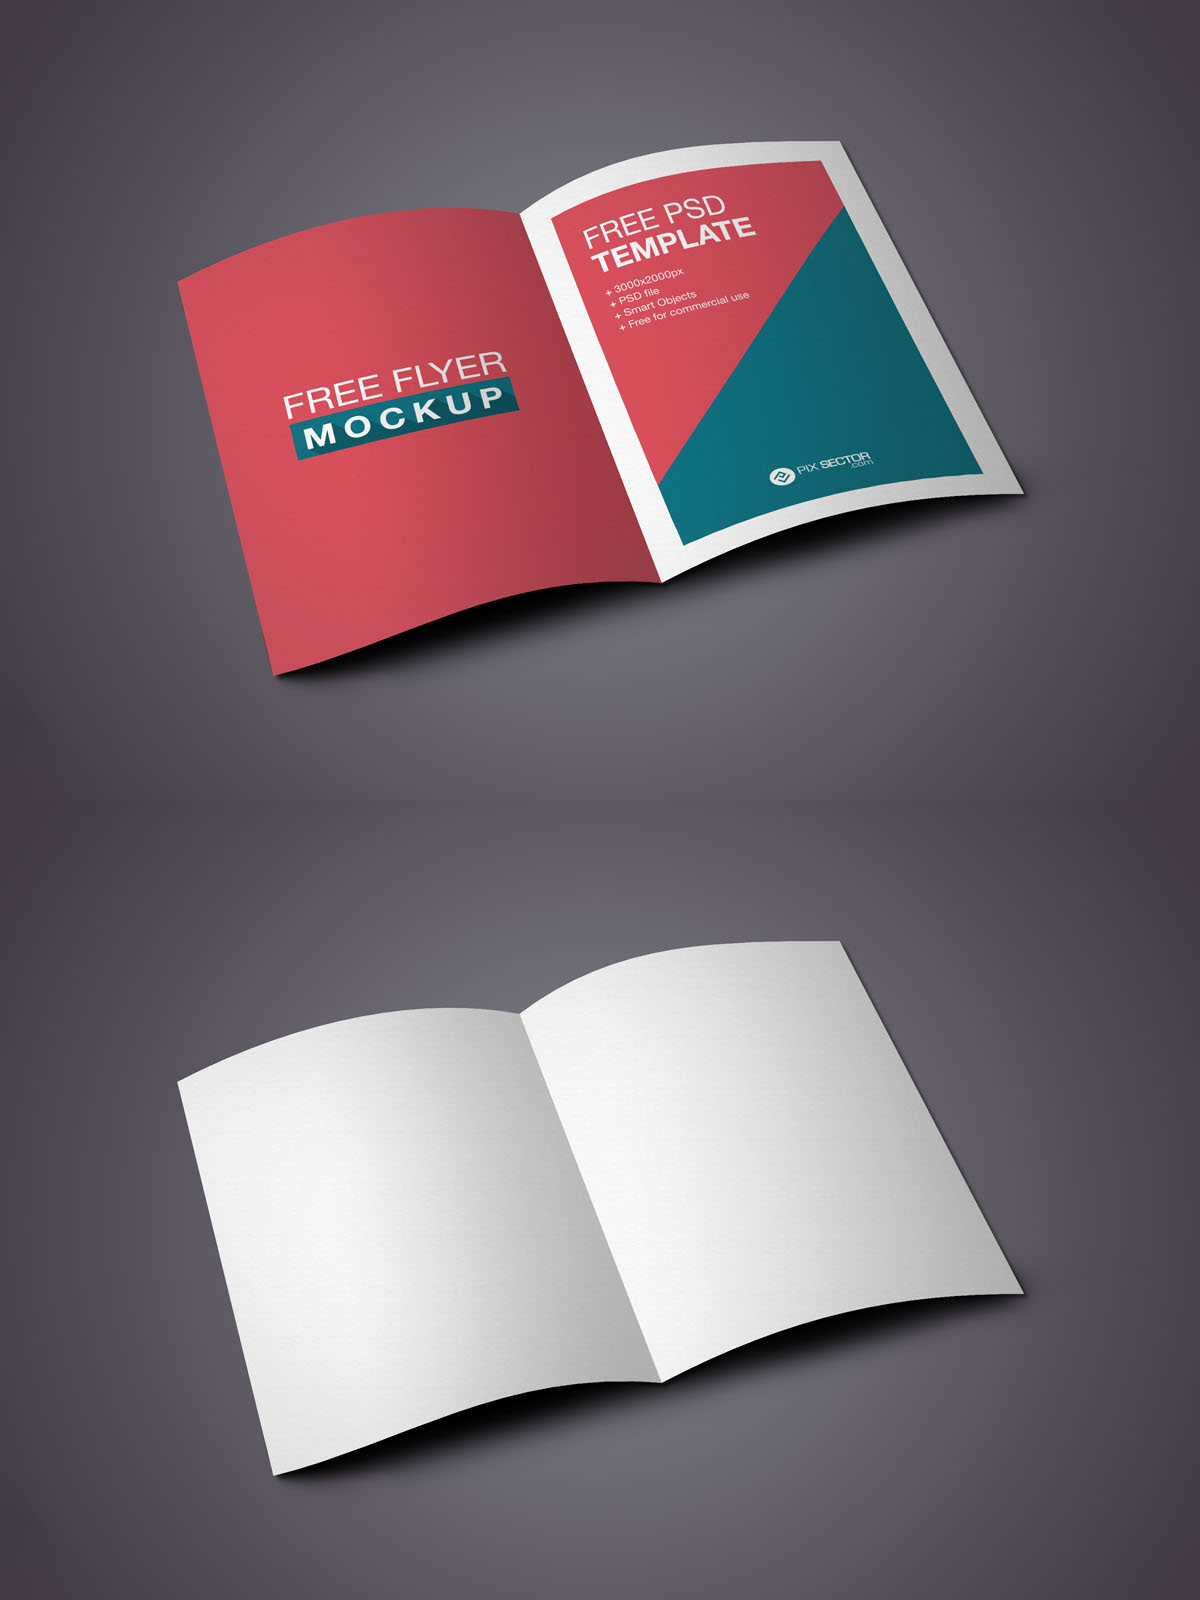 Download Free Inside Flyer Mockup - Find the Perfect Creative ...